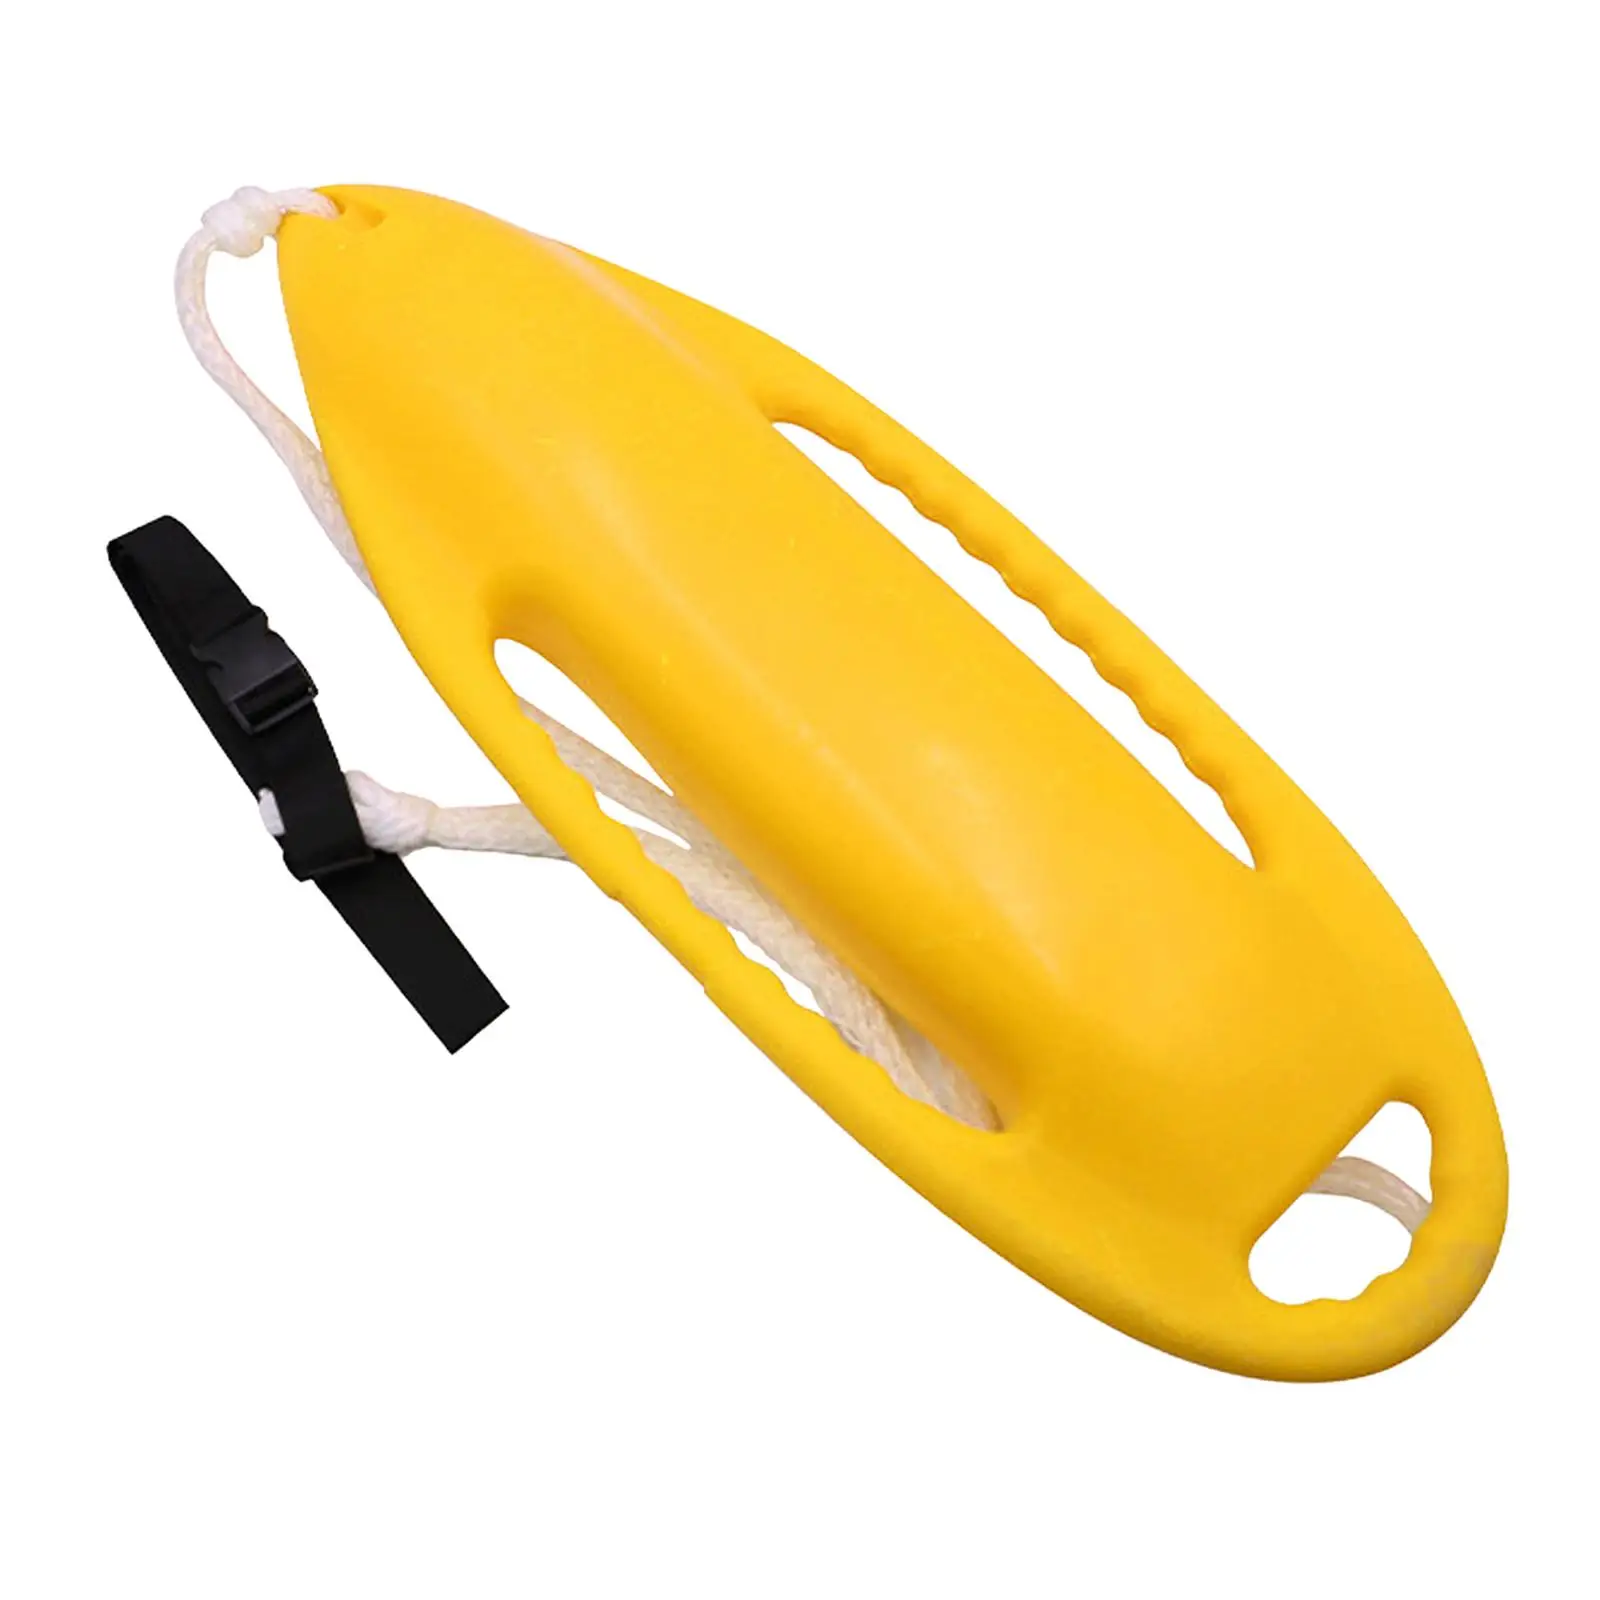 Rescue Can Rescue Buoy Free Inflatable for Lifeguard Large Buoyancy